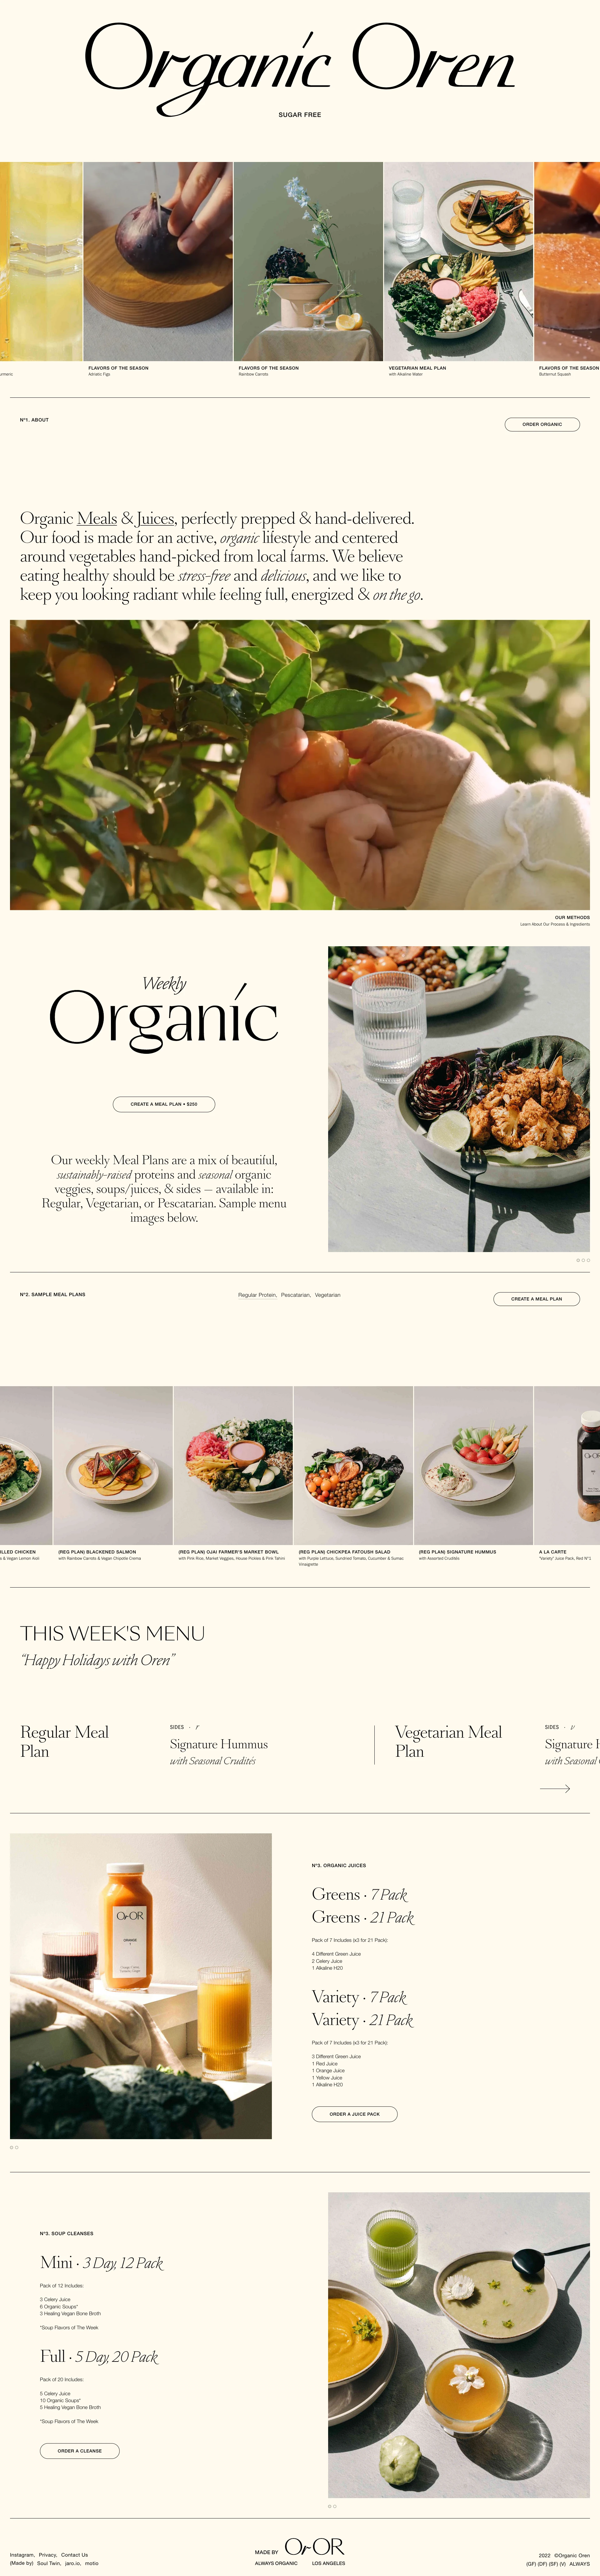 Organic Oren Landing Page Example: Organic Meals & Juices, perfectly prepped & hand-delivered. Our food is made for an active, organic lifestyle and centered around vegetables hand-picked from local farms. We believe eating healthy should be stress-free and delicious, and we like to keep you looking radiant while feeling full, energized & on the go.